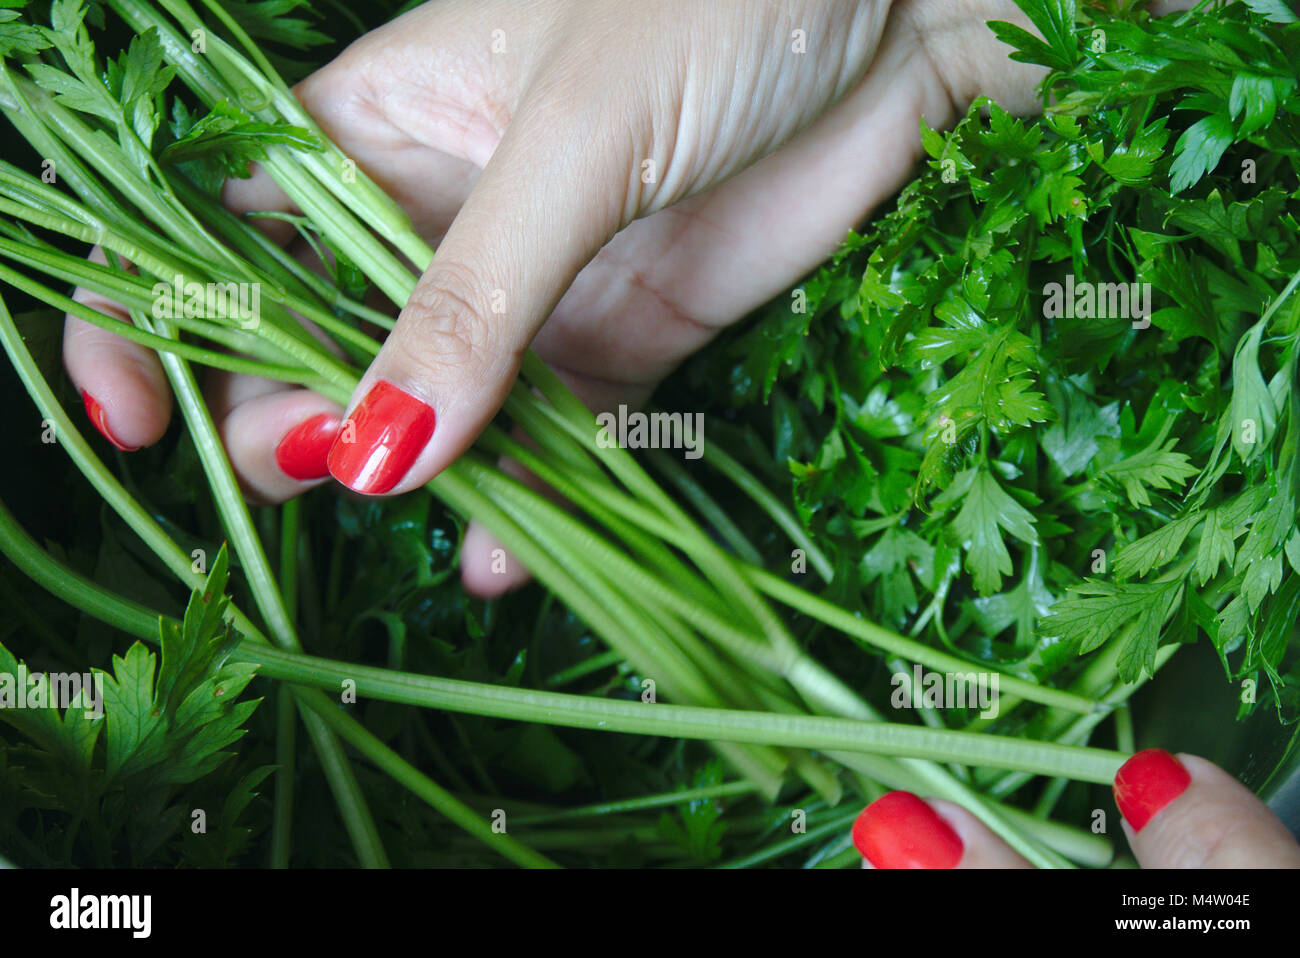 Woman selecting parsley showing the hand with beautiful red nails. Stock Photo